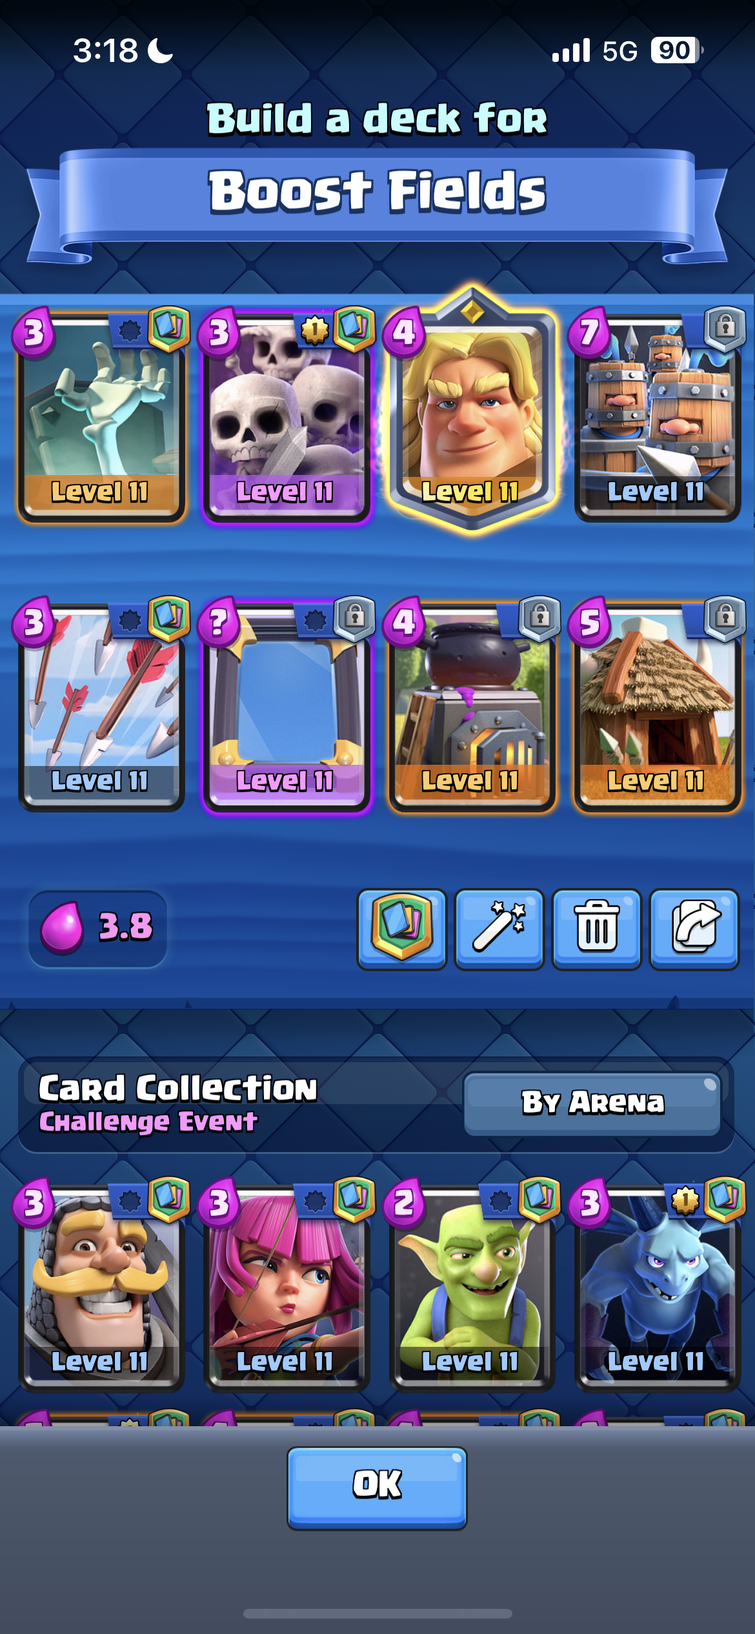 Clash Royale: 5 Best Monk decks with Tips